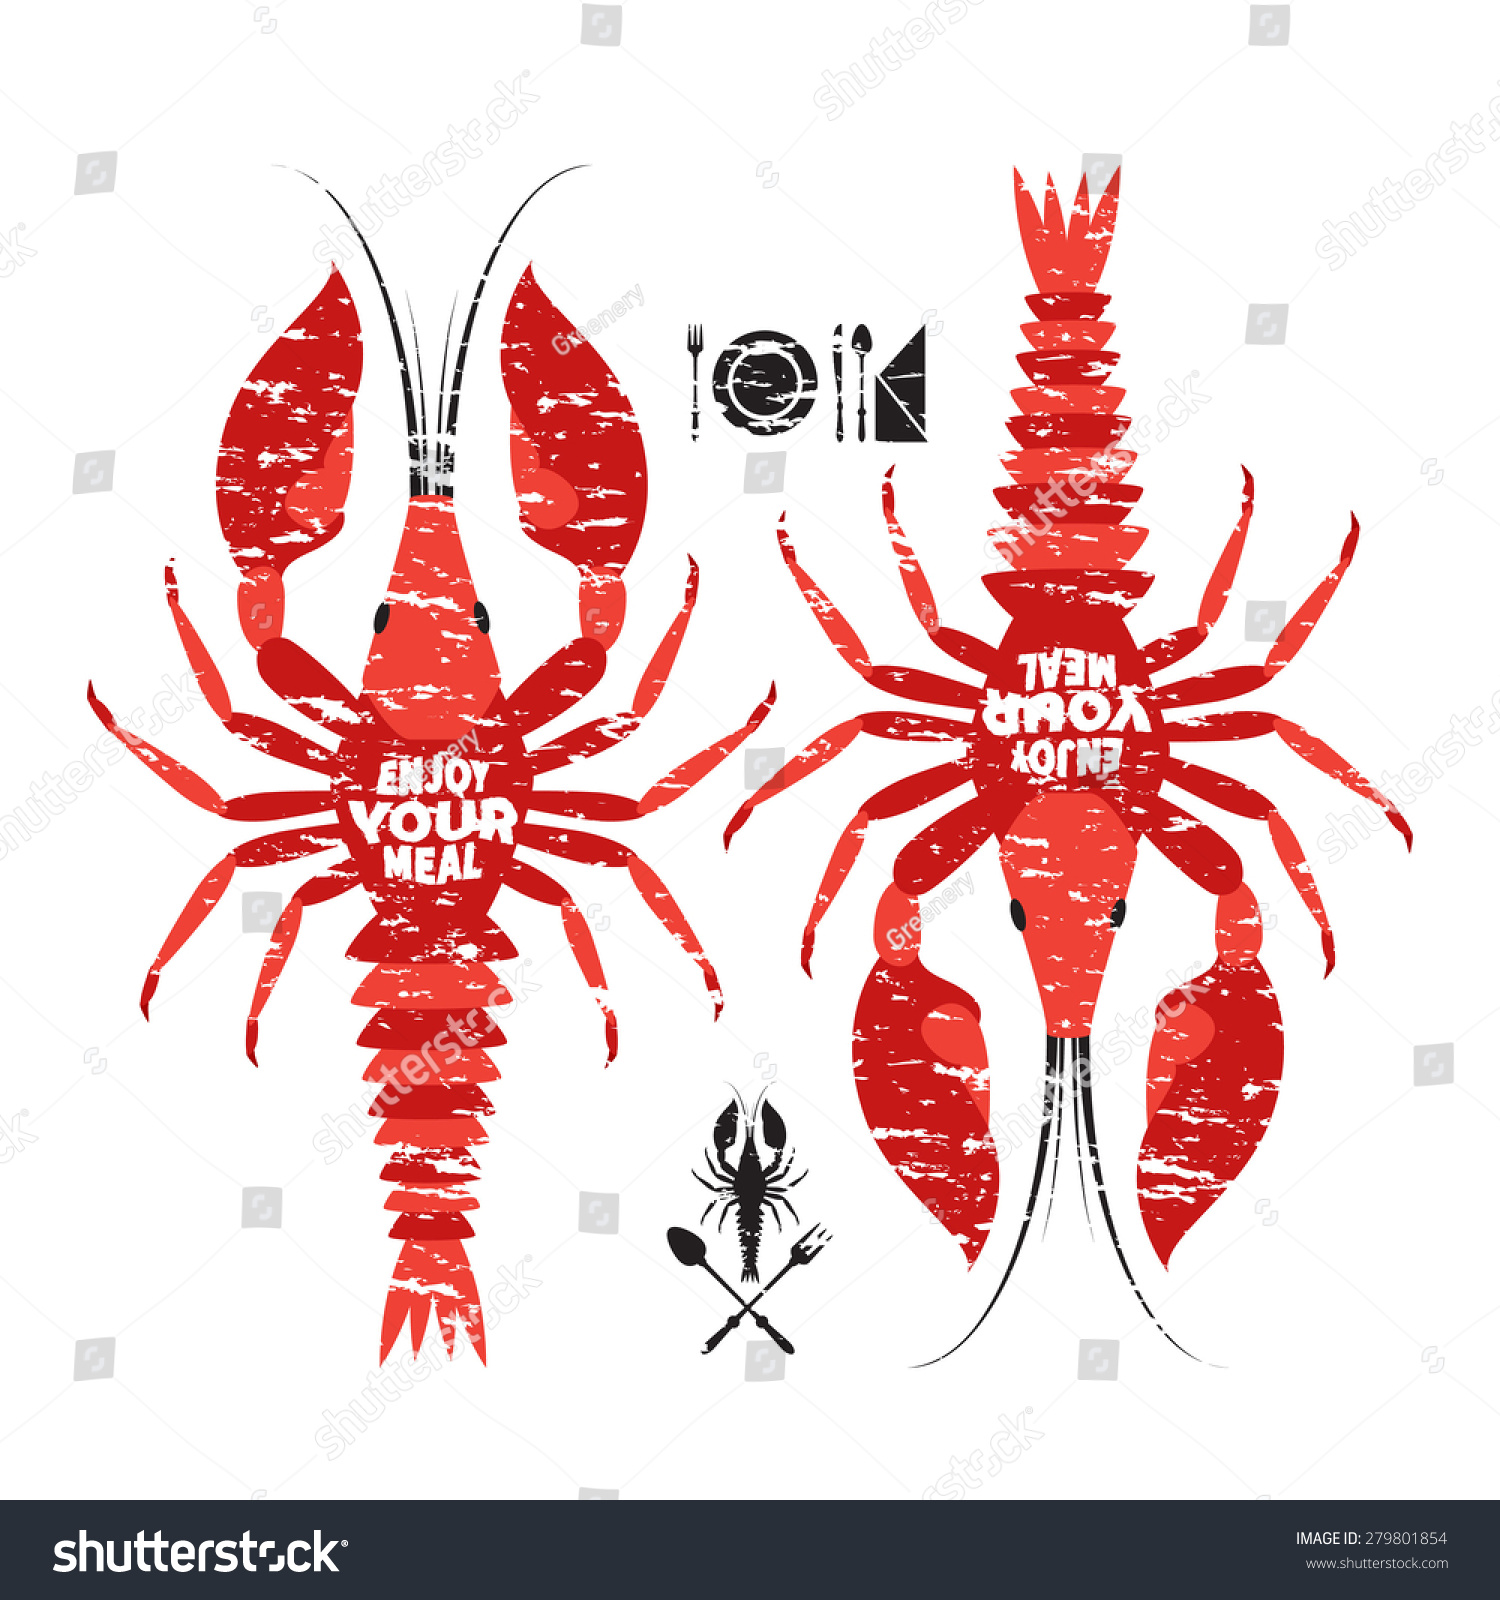 Two Red Craw Fish Vector Lobster Stock Photo (Photo, Vector ...